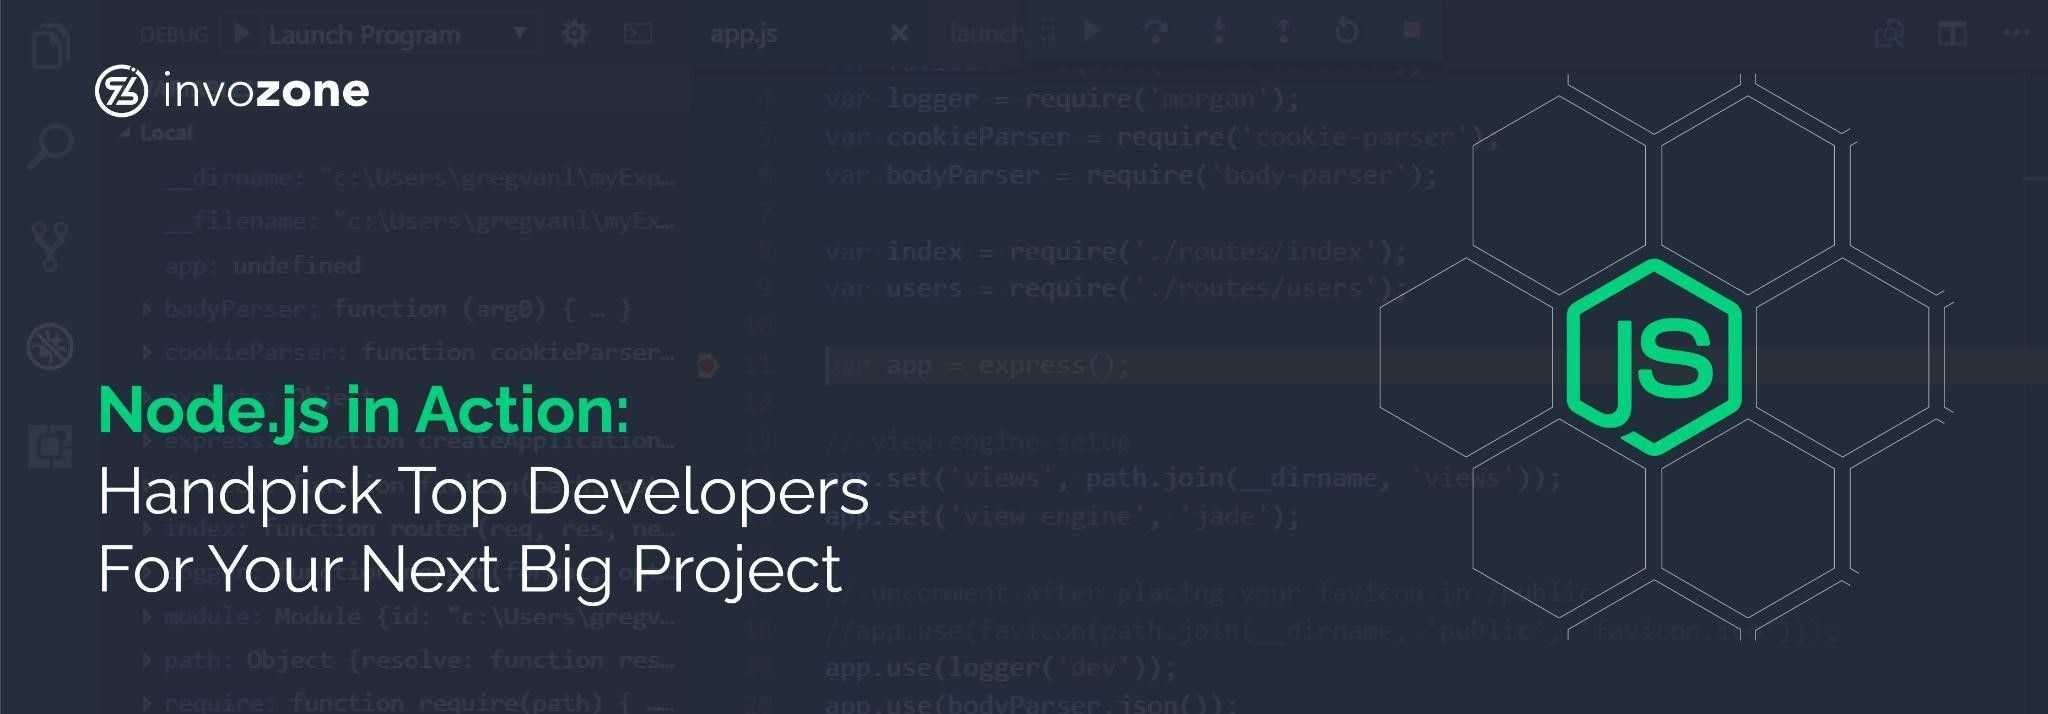 Node.js in Action: Handpick Top Developers For Your Next Big Project